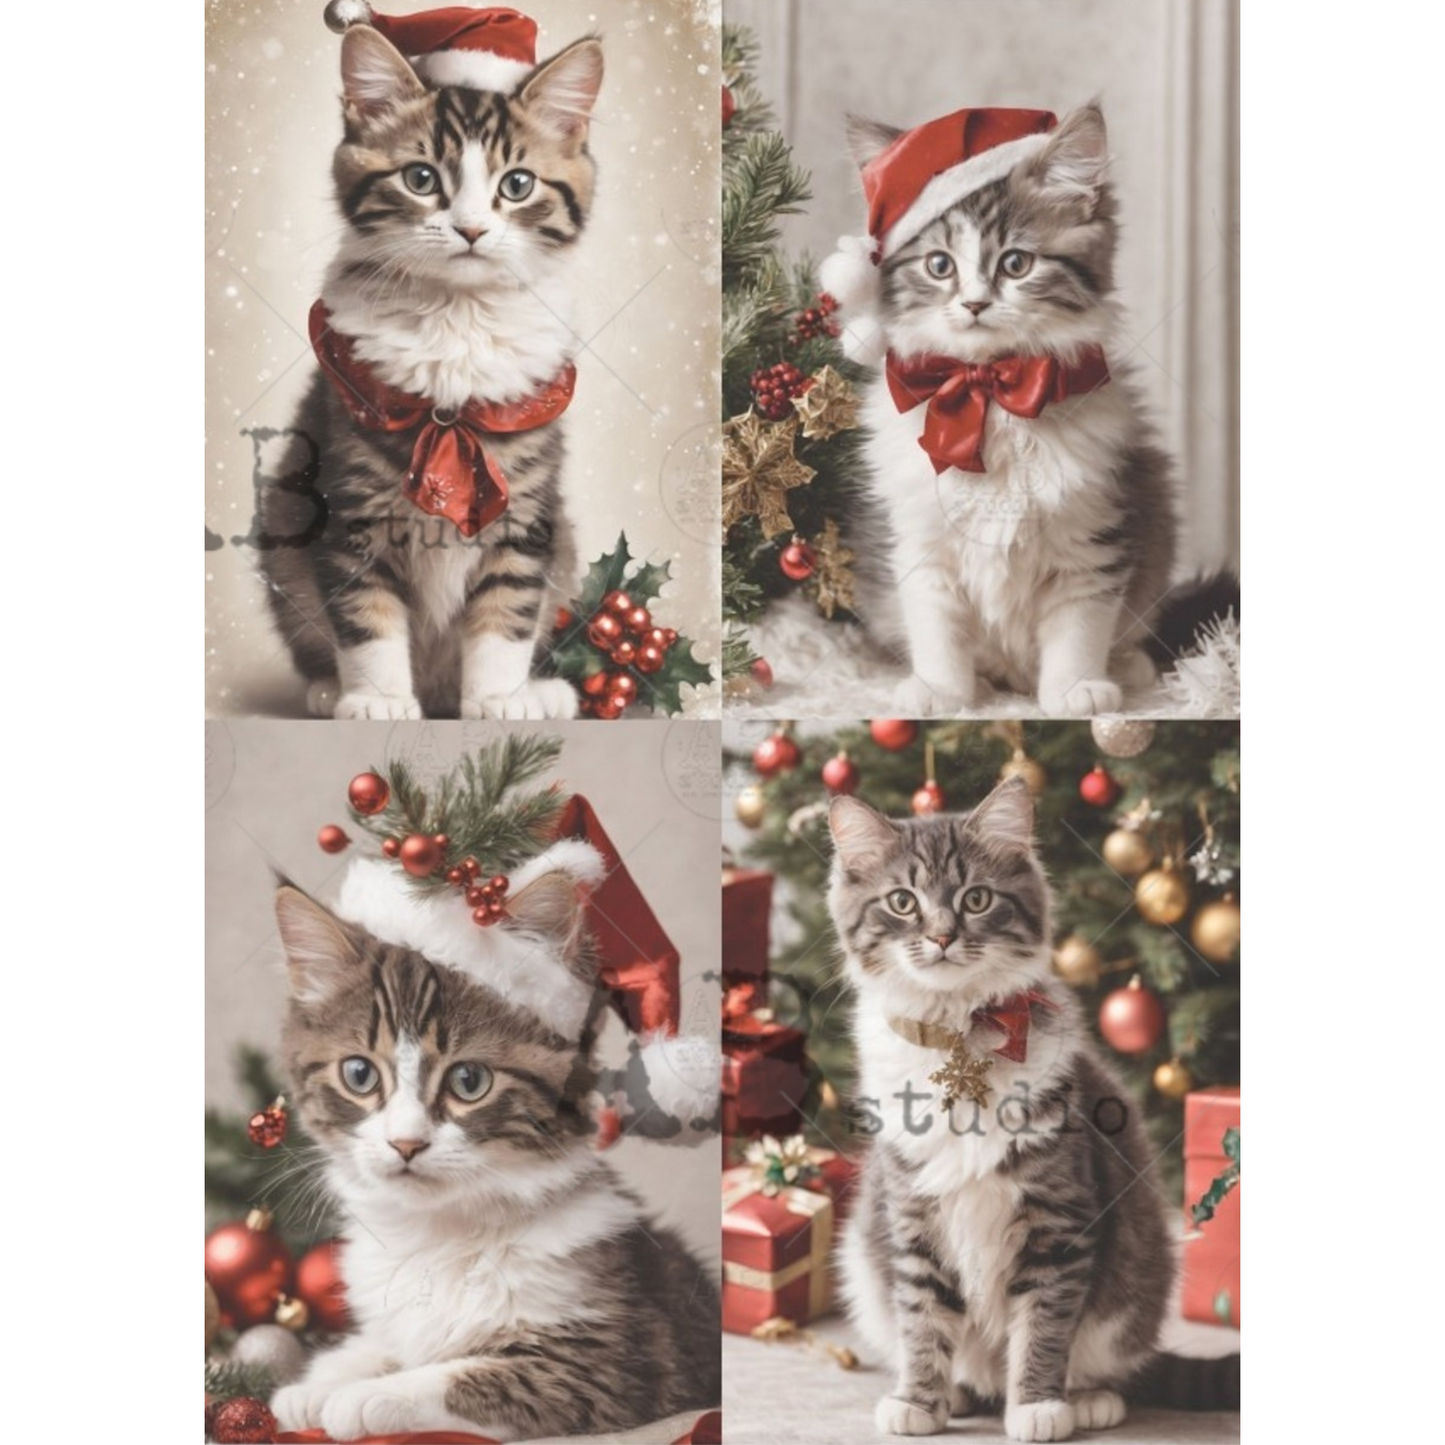 "4 Pack Christmas Kittens" decoupage rice paper by AB Studio. Available at Milton's Daughter.